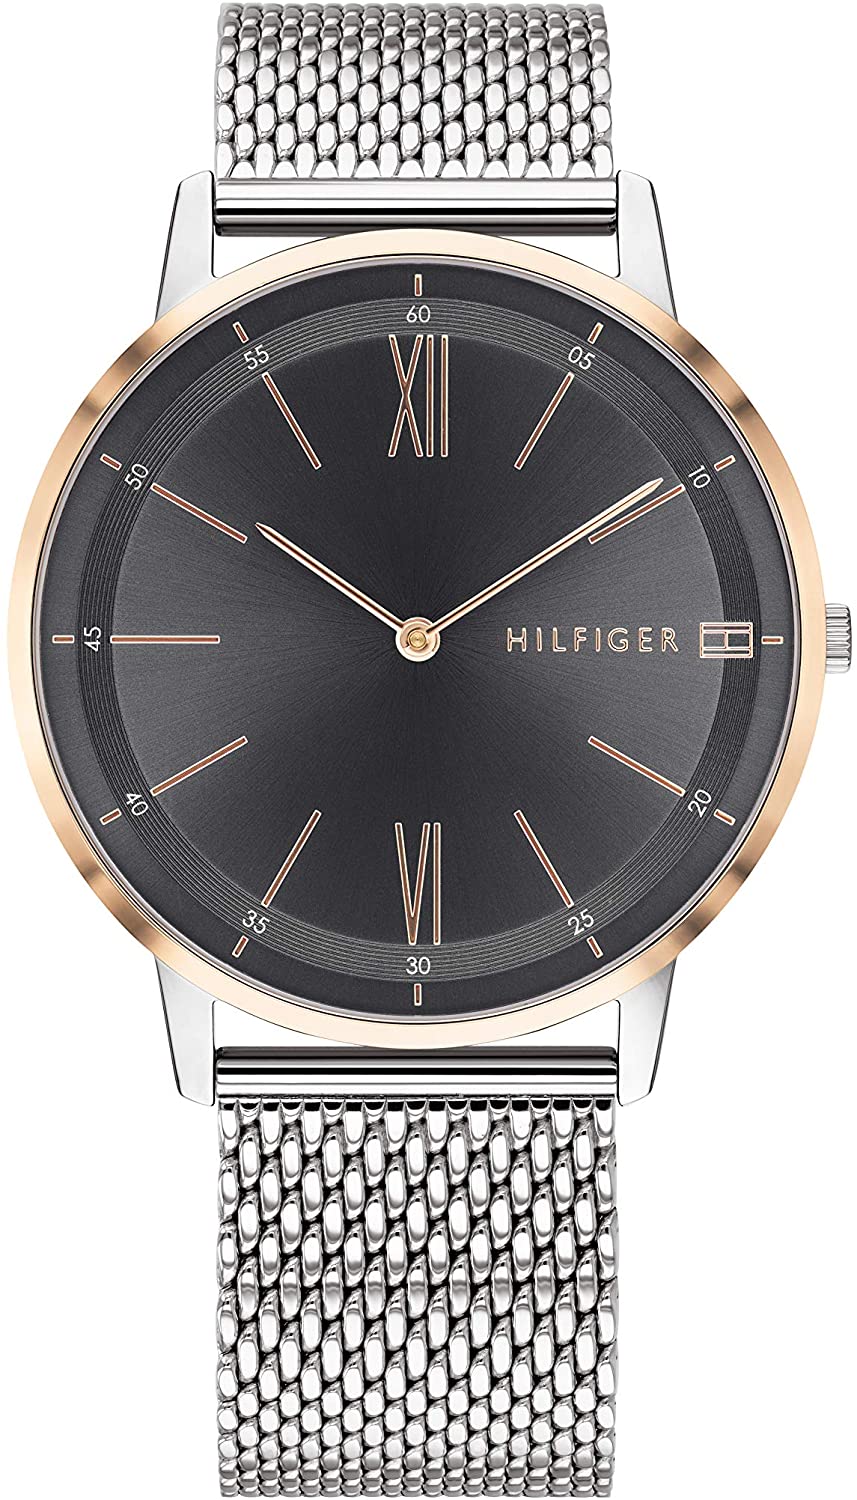 Tommy Hilfiger Men's Quartz Watch with Stainless Steel Strap, Silver, 20 (Model: 1791512)